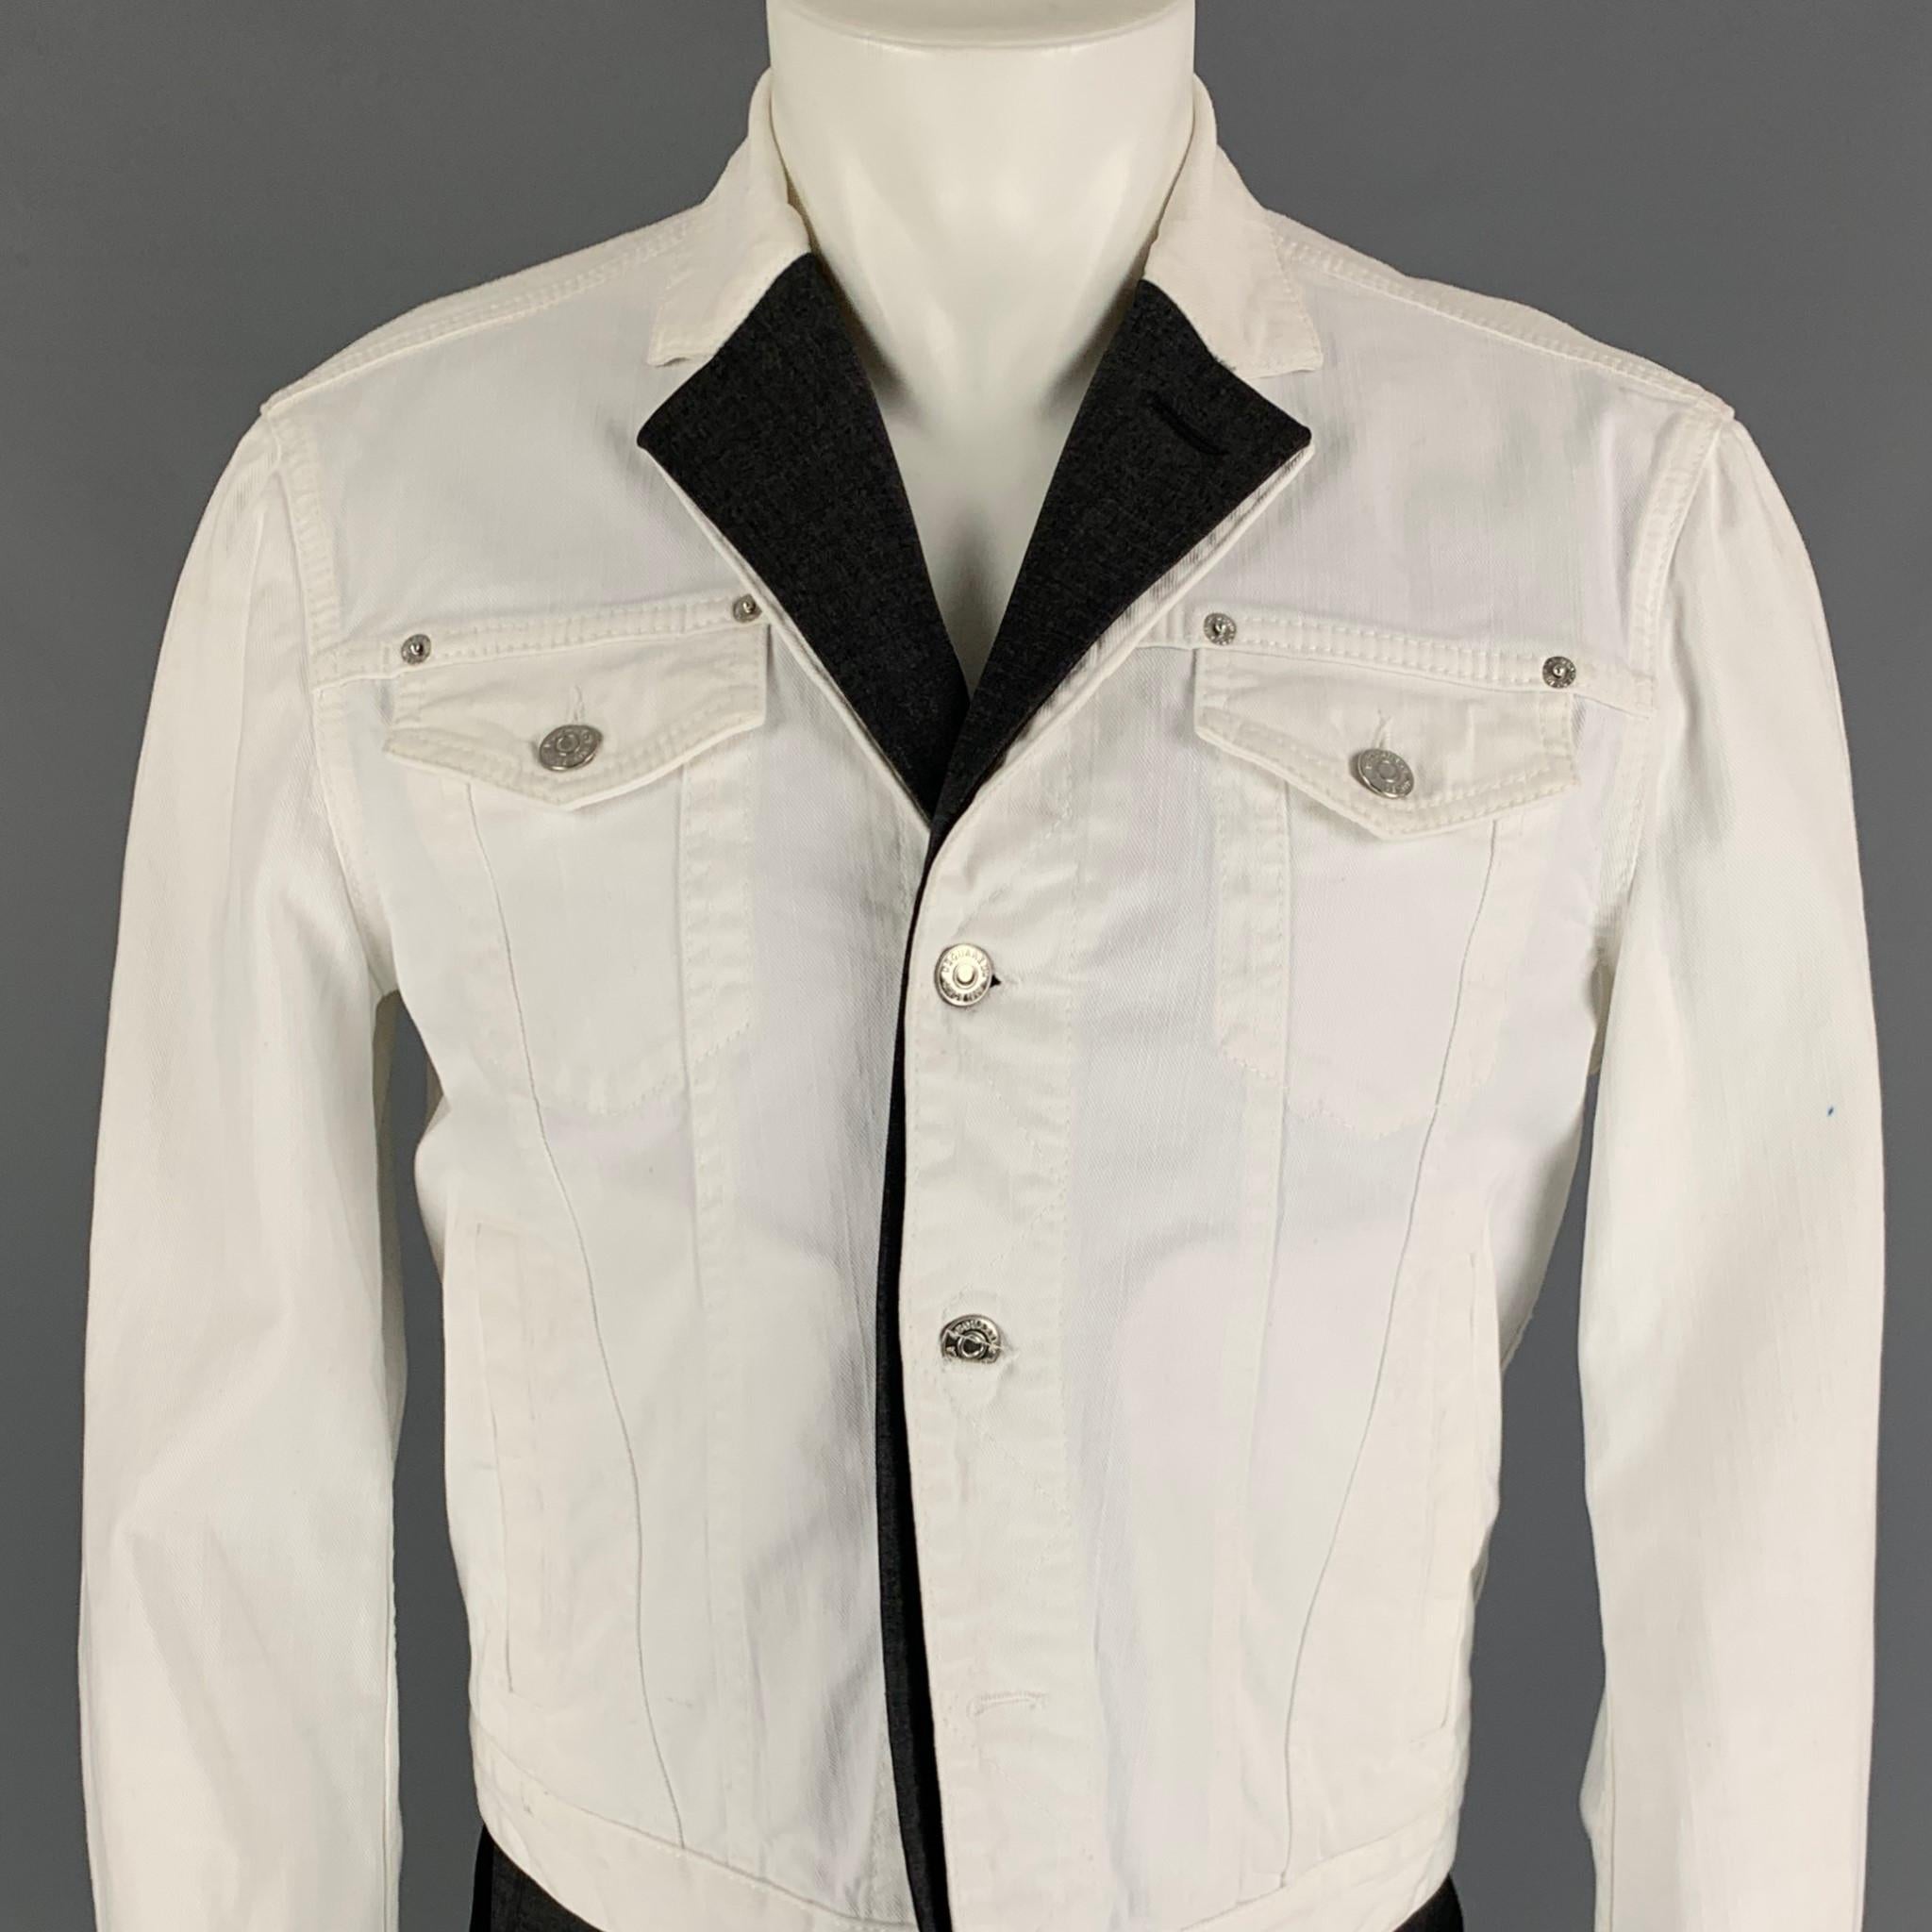 DSQUARED2 jacket comes in a white & grey cotton with a wool blend vest layer featuring a trucker style, notch lapel, front pockets, and a buttoned closure. Made in Italy. 

Good Pre-Owned Condition. Minor discoloration at collar.
Marked: Size tag